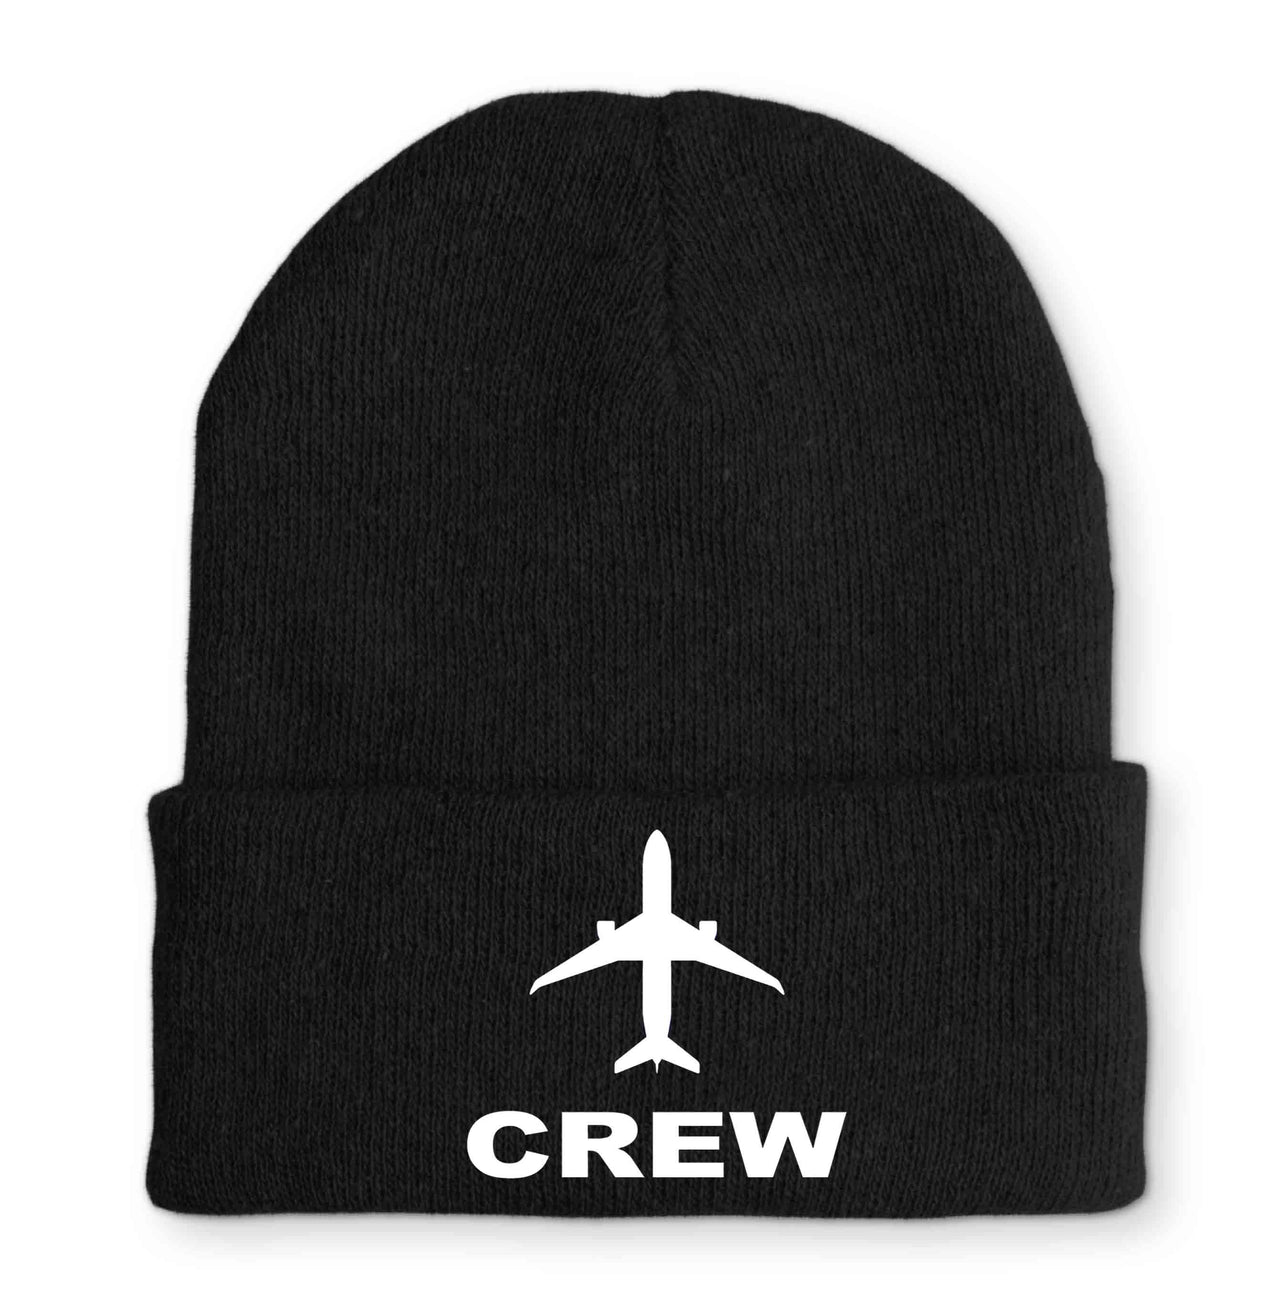 CREW Embroidered Beanies